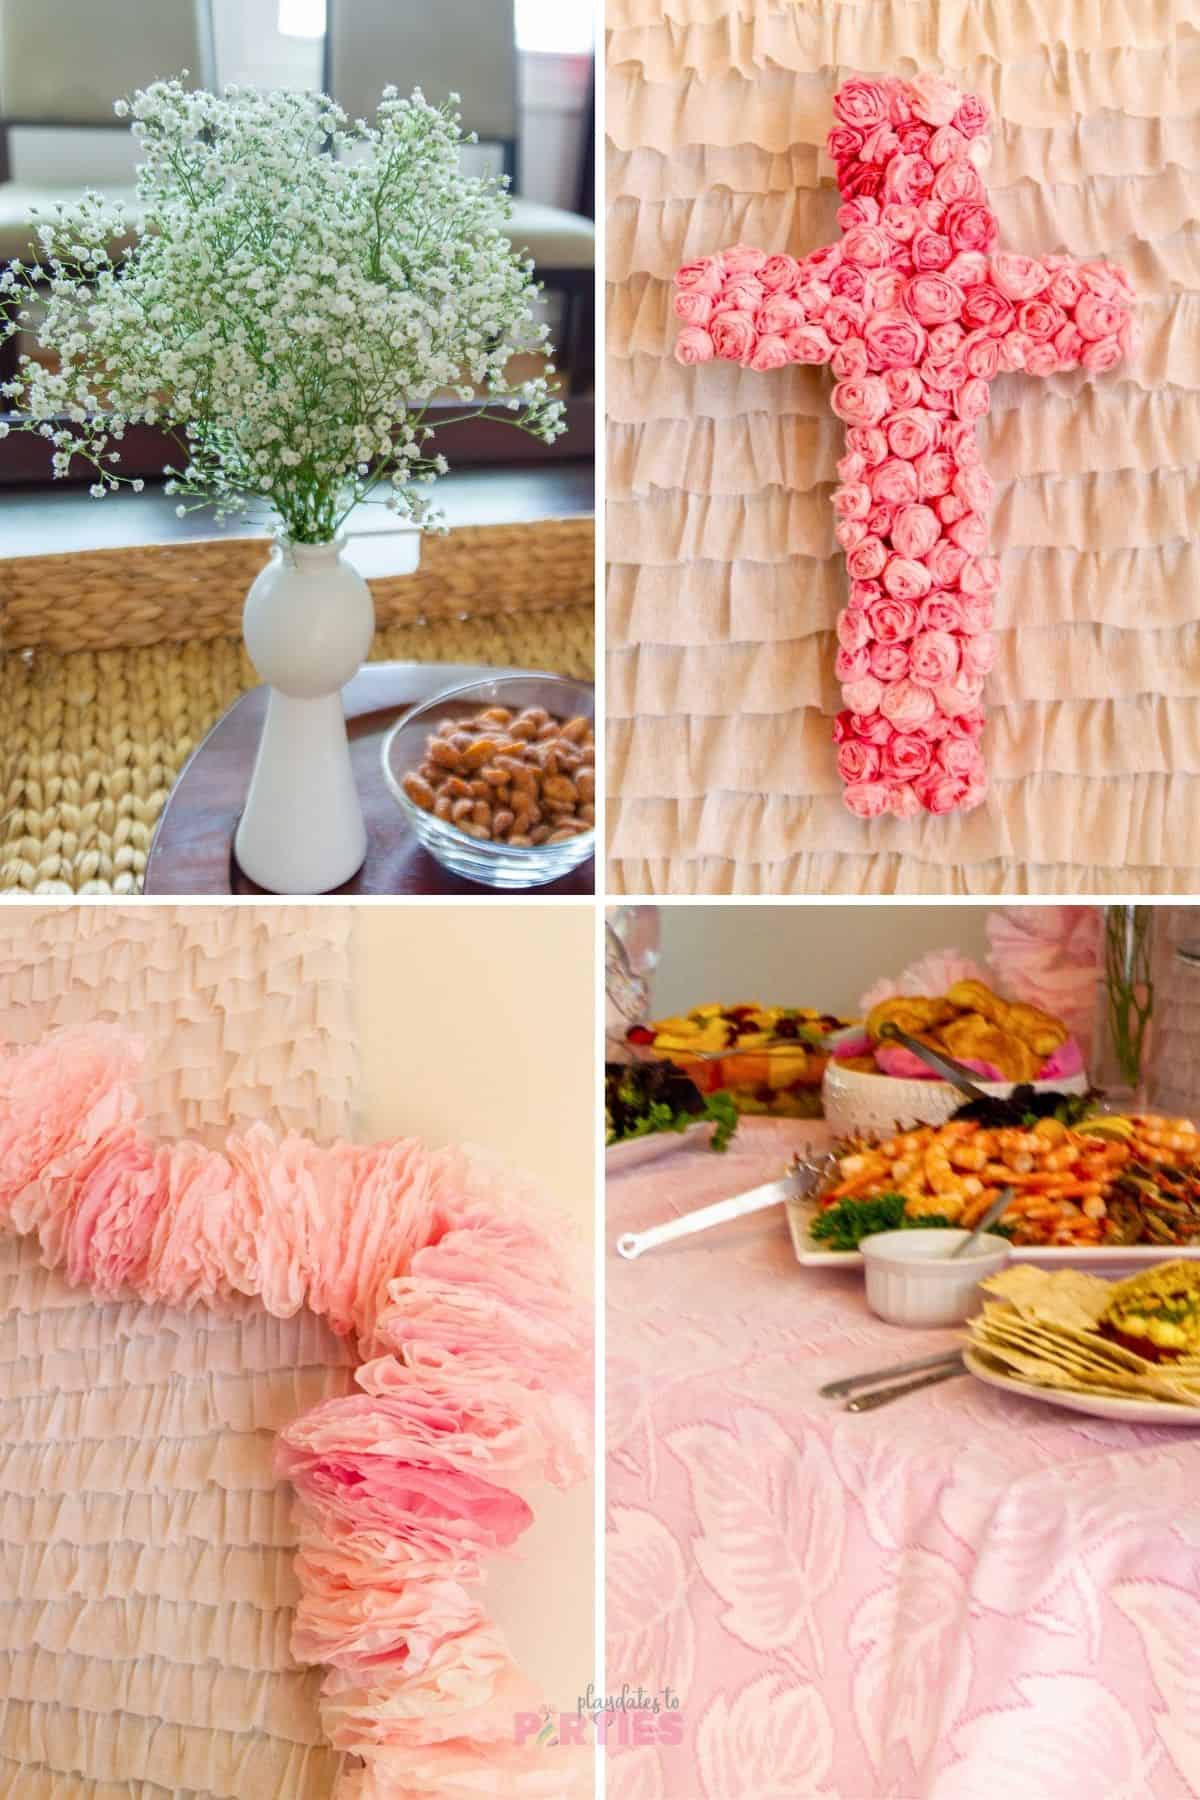 Collage of party decor, including baby's breath, riffle garland, cross covered in rosettes, and pink lace table covers.